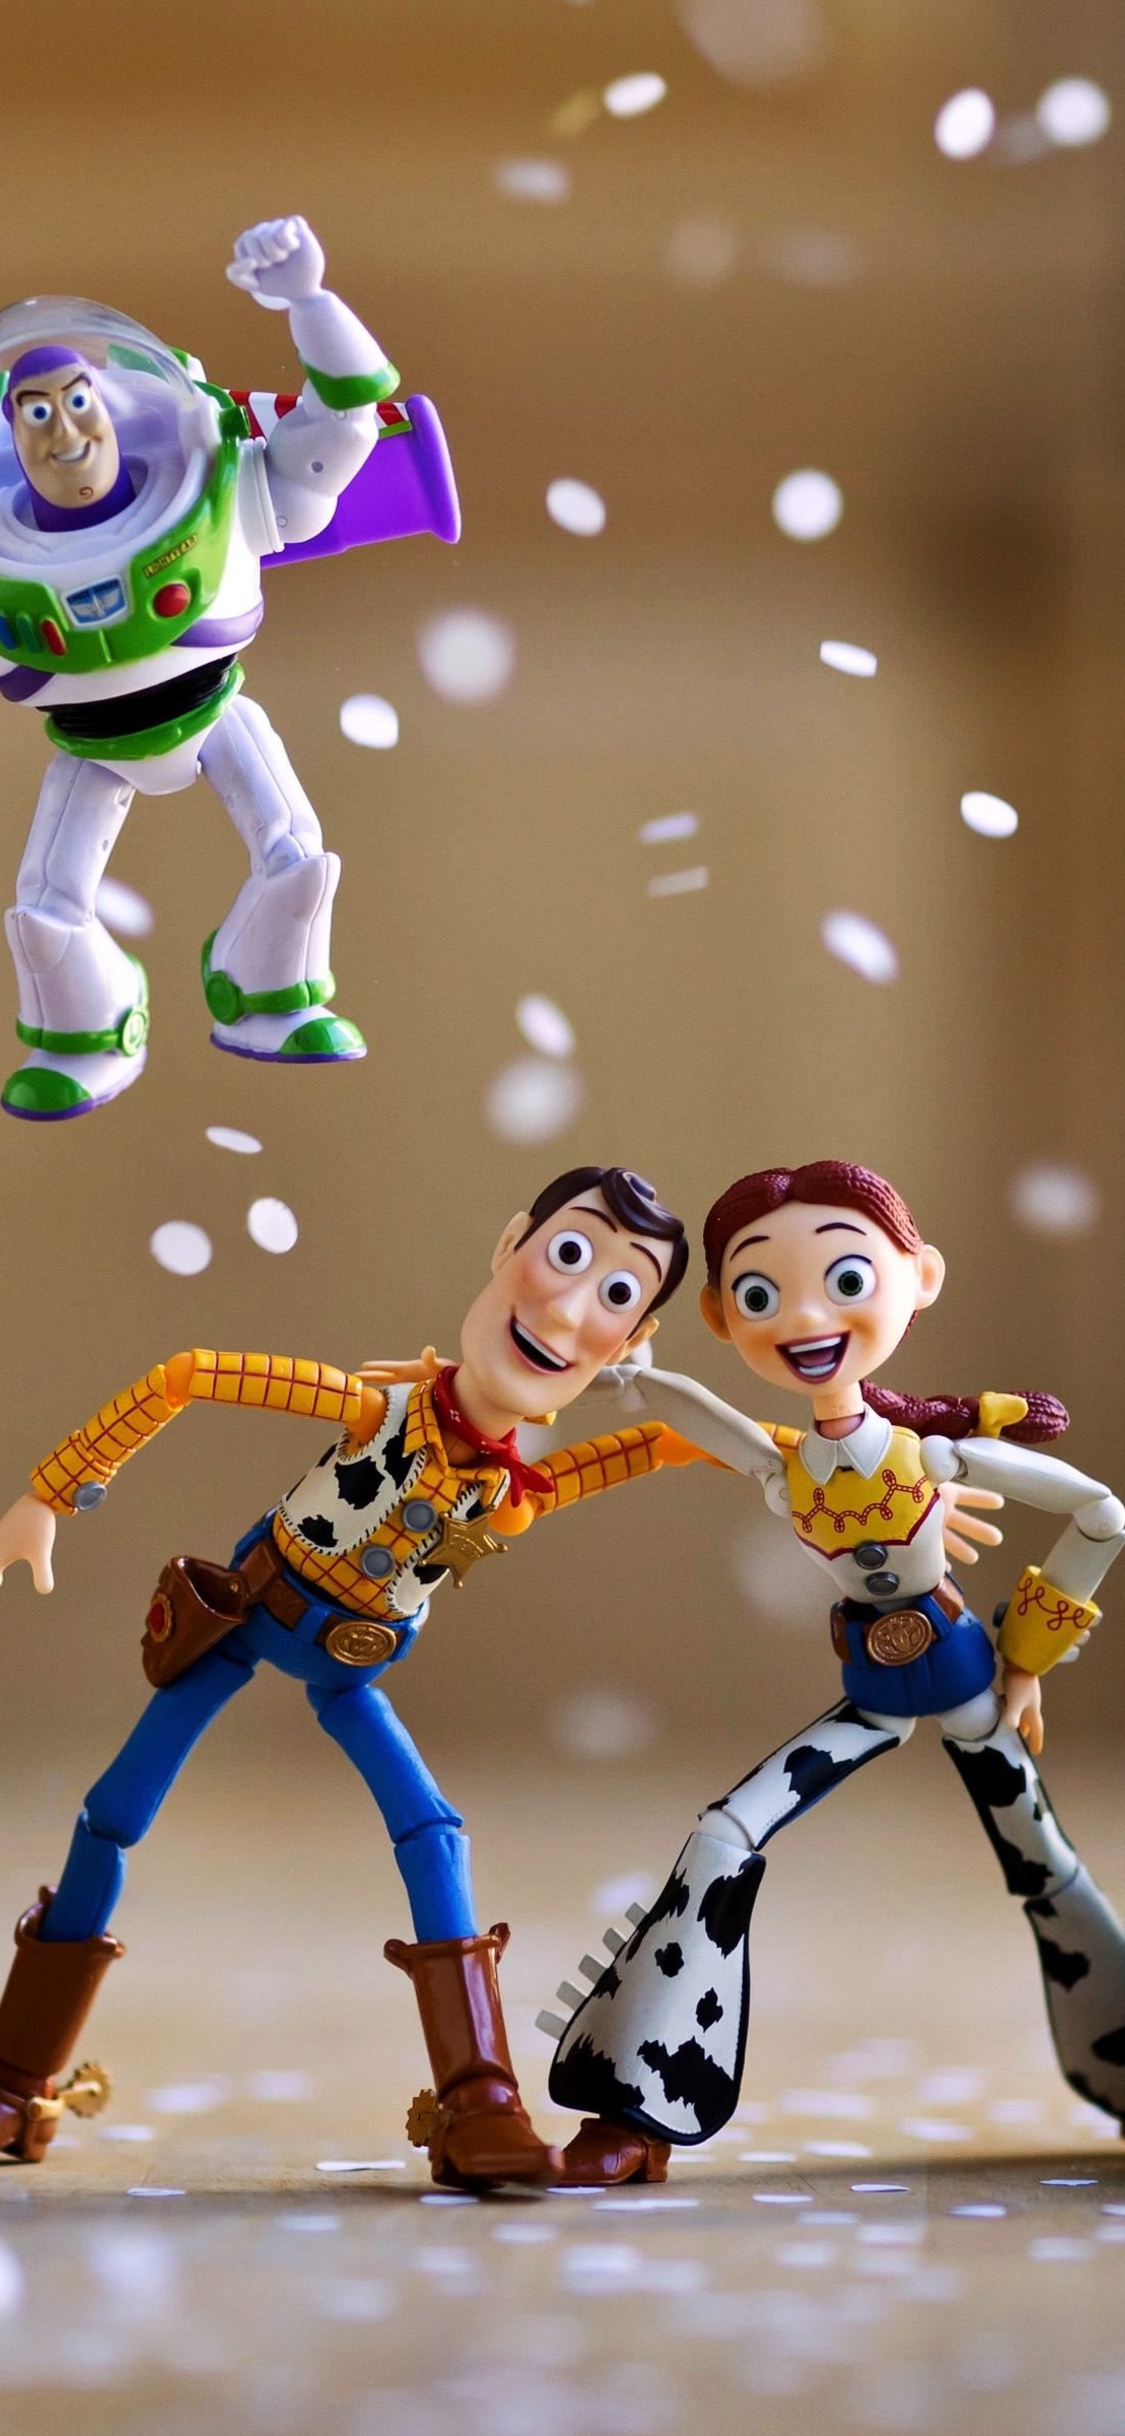 Toy Story Iphone Wallpapers